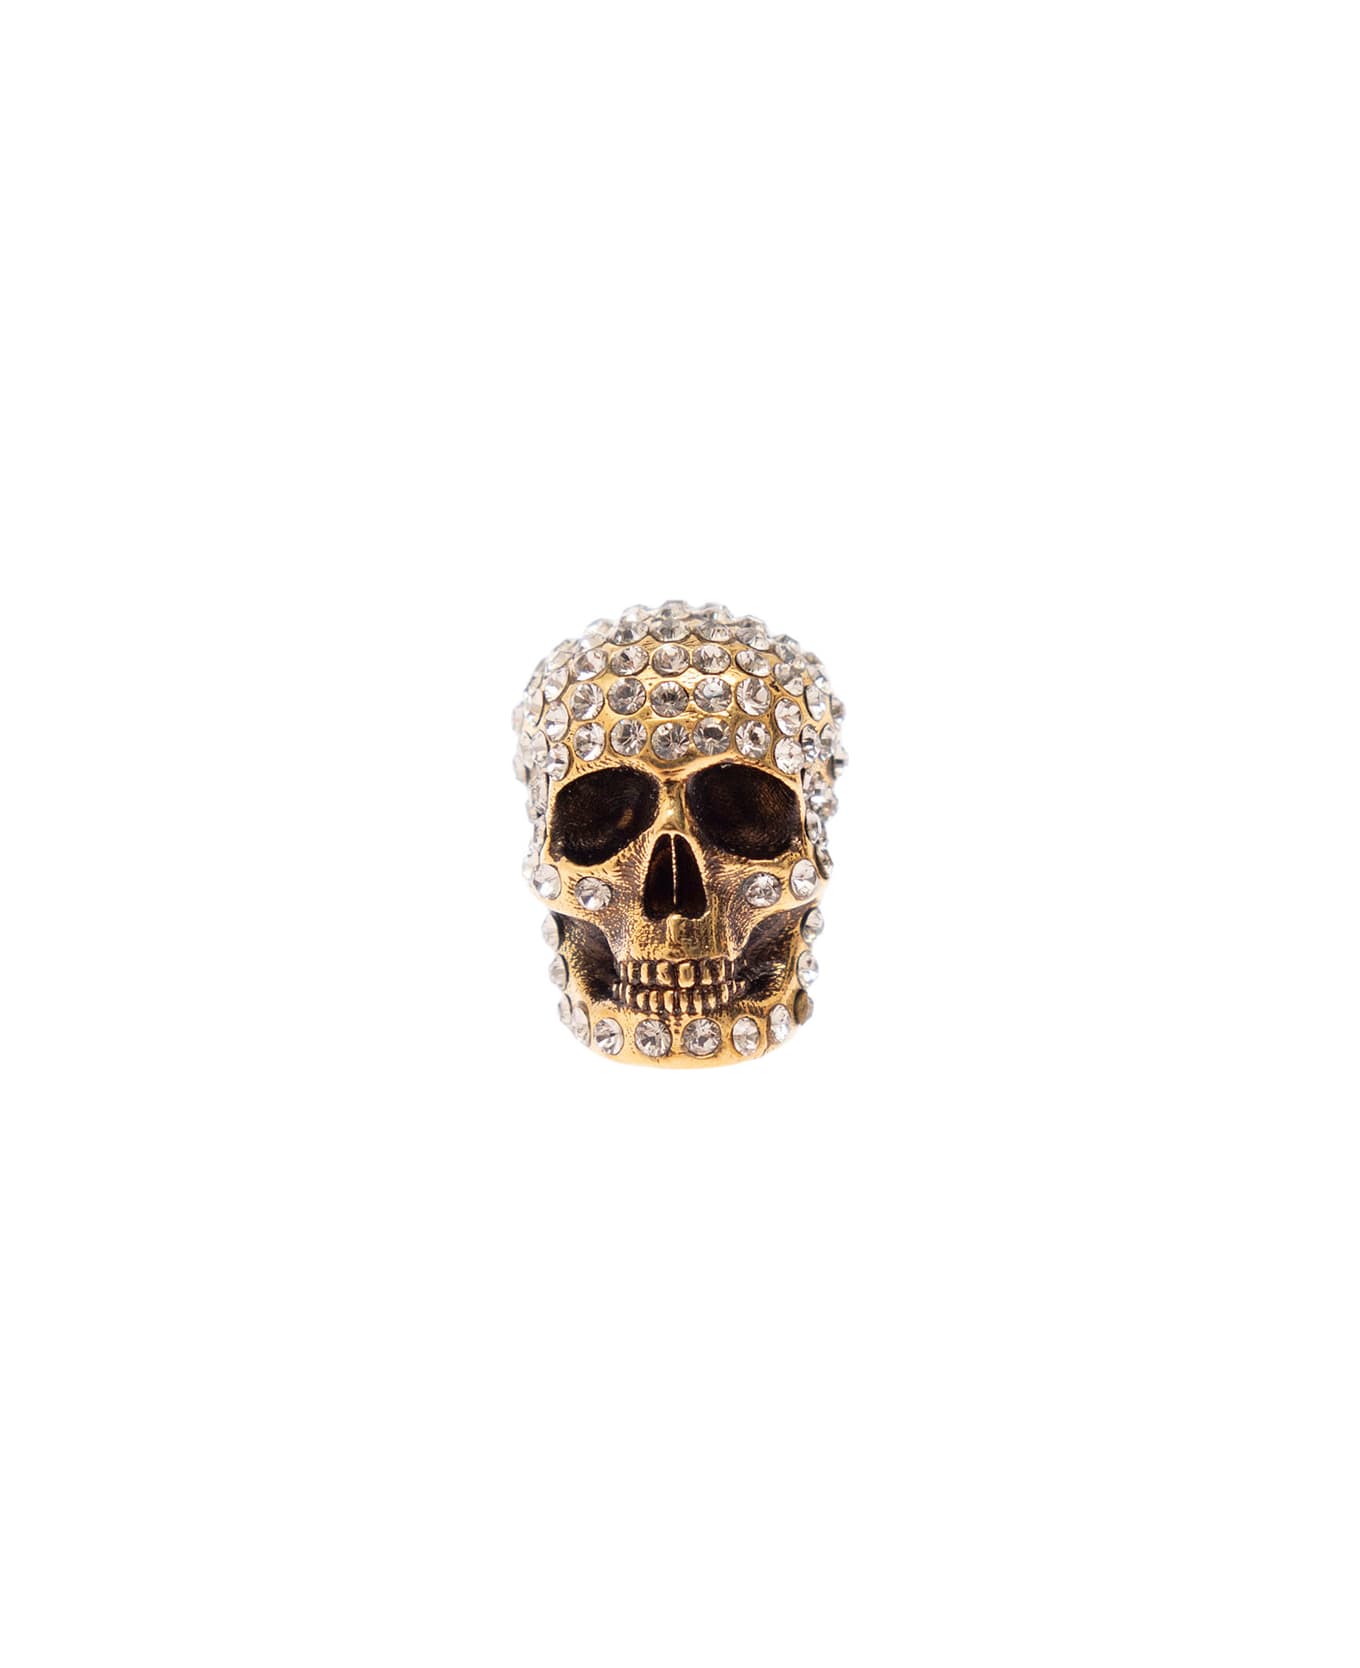 Alexander McQueen Woman's Pave Skull Brass Earring With Crystals - Metallic